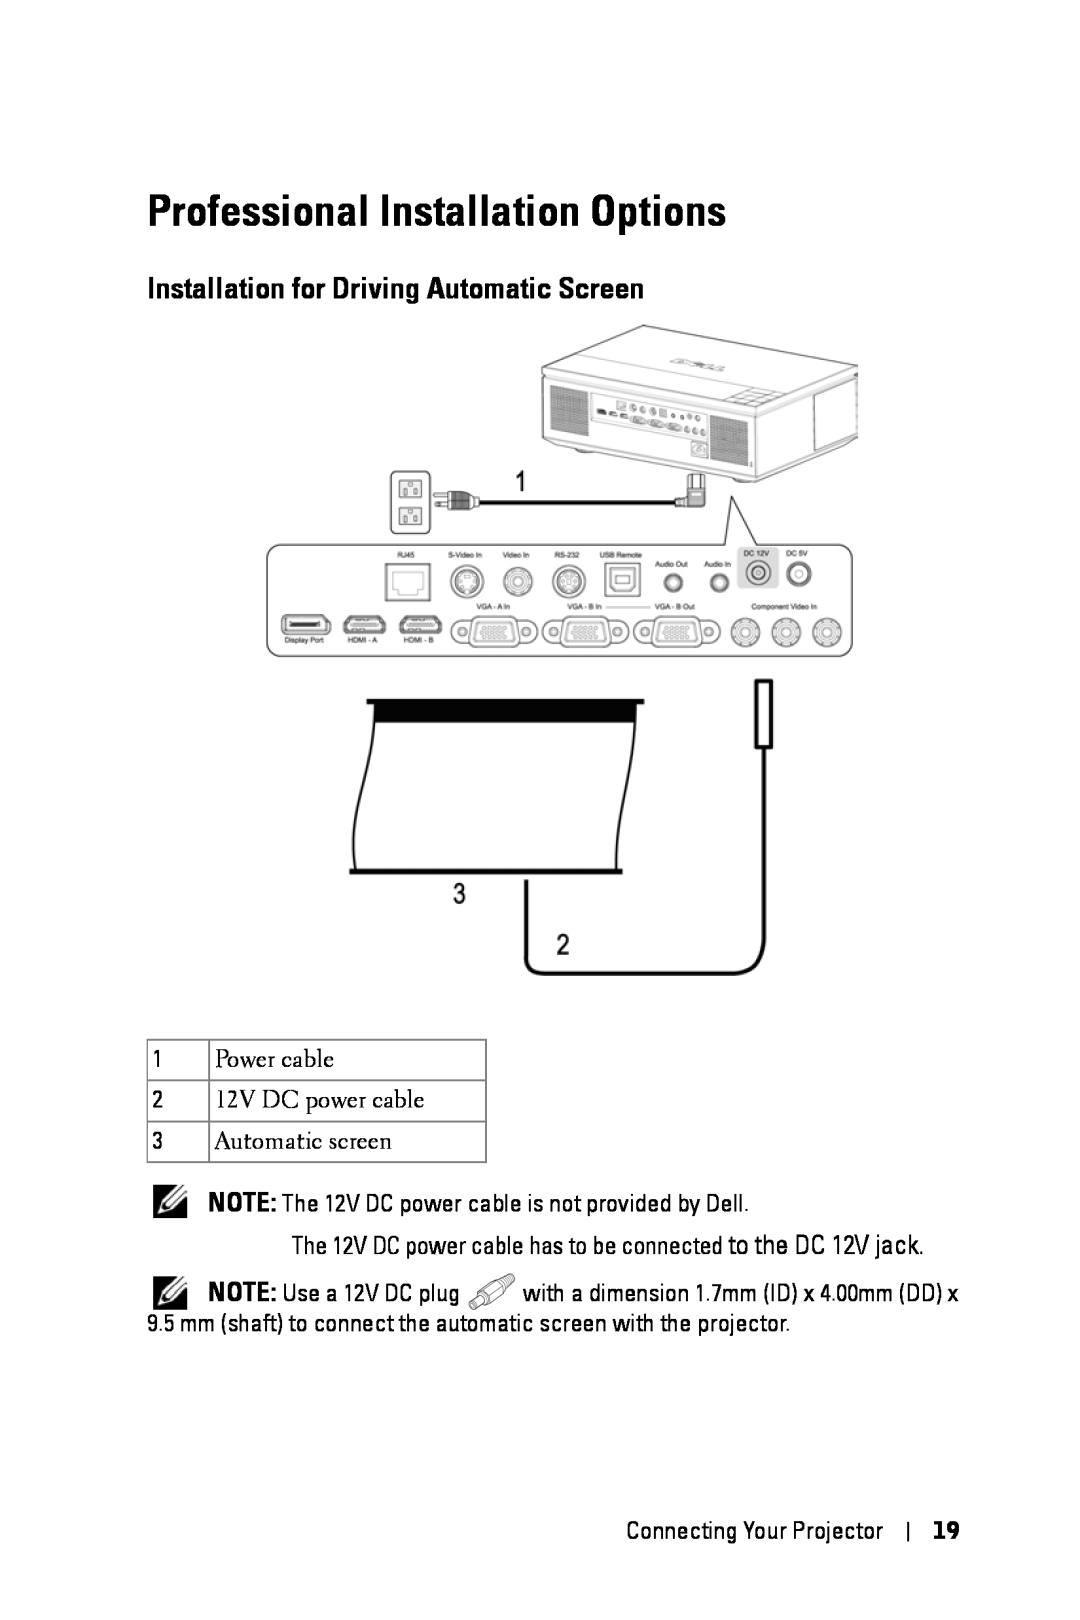 Dell 7609WU manual Professional Installation Options, Installation for Driving Automatic Screen, Connecting Your Projector 